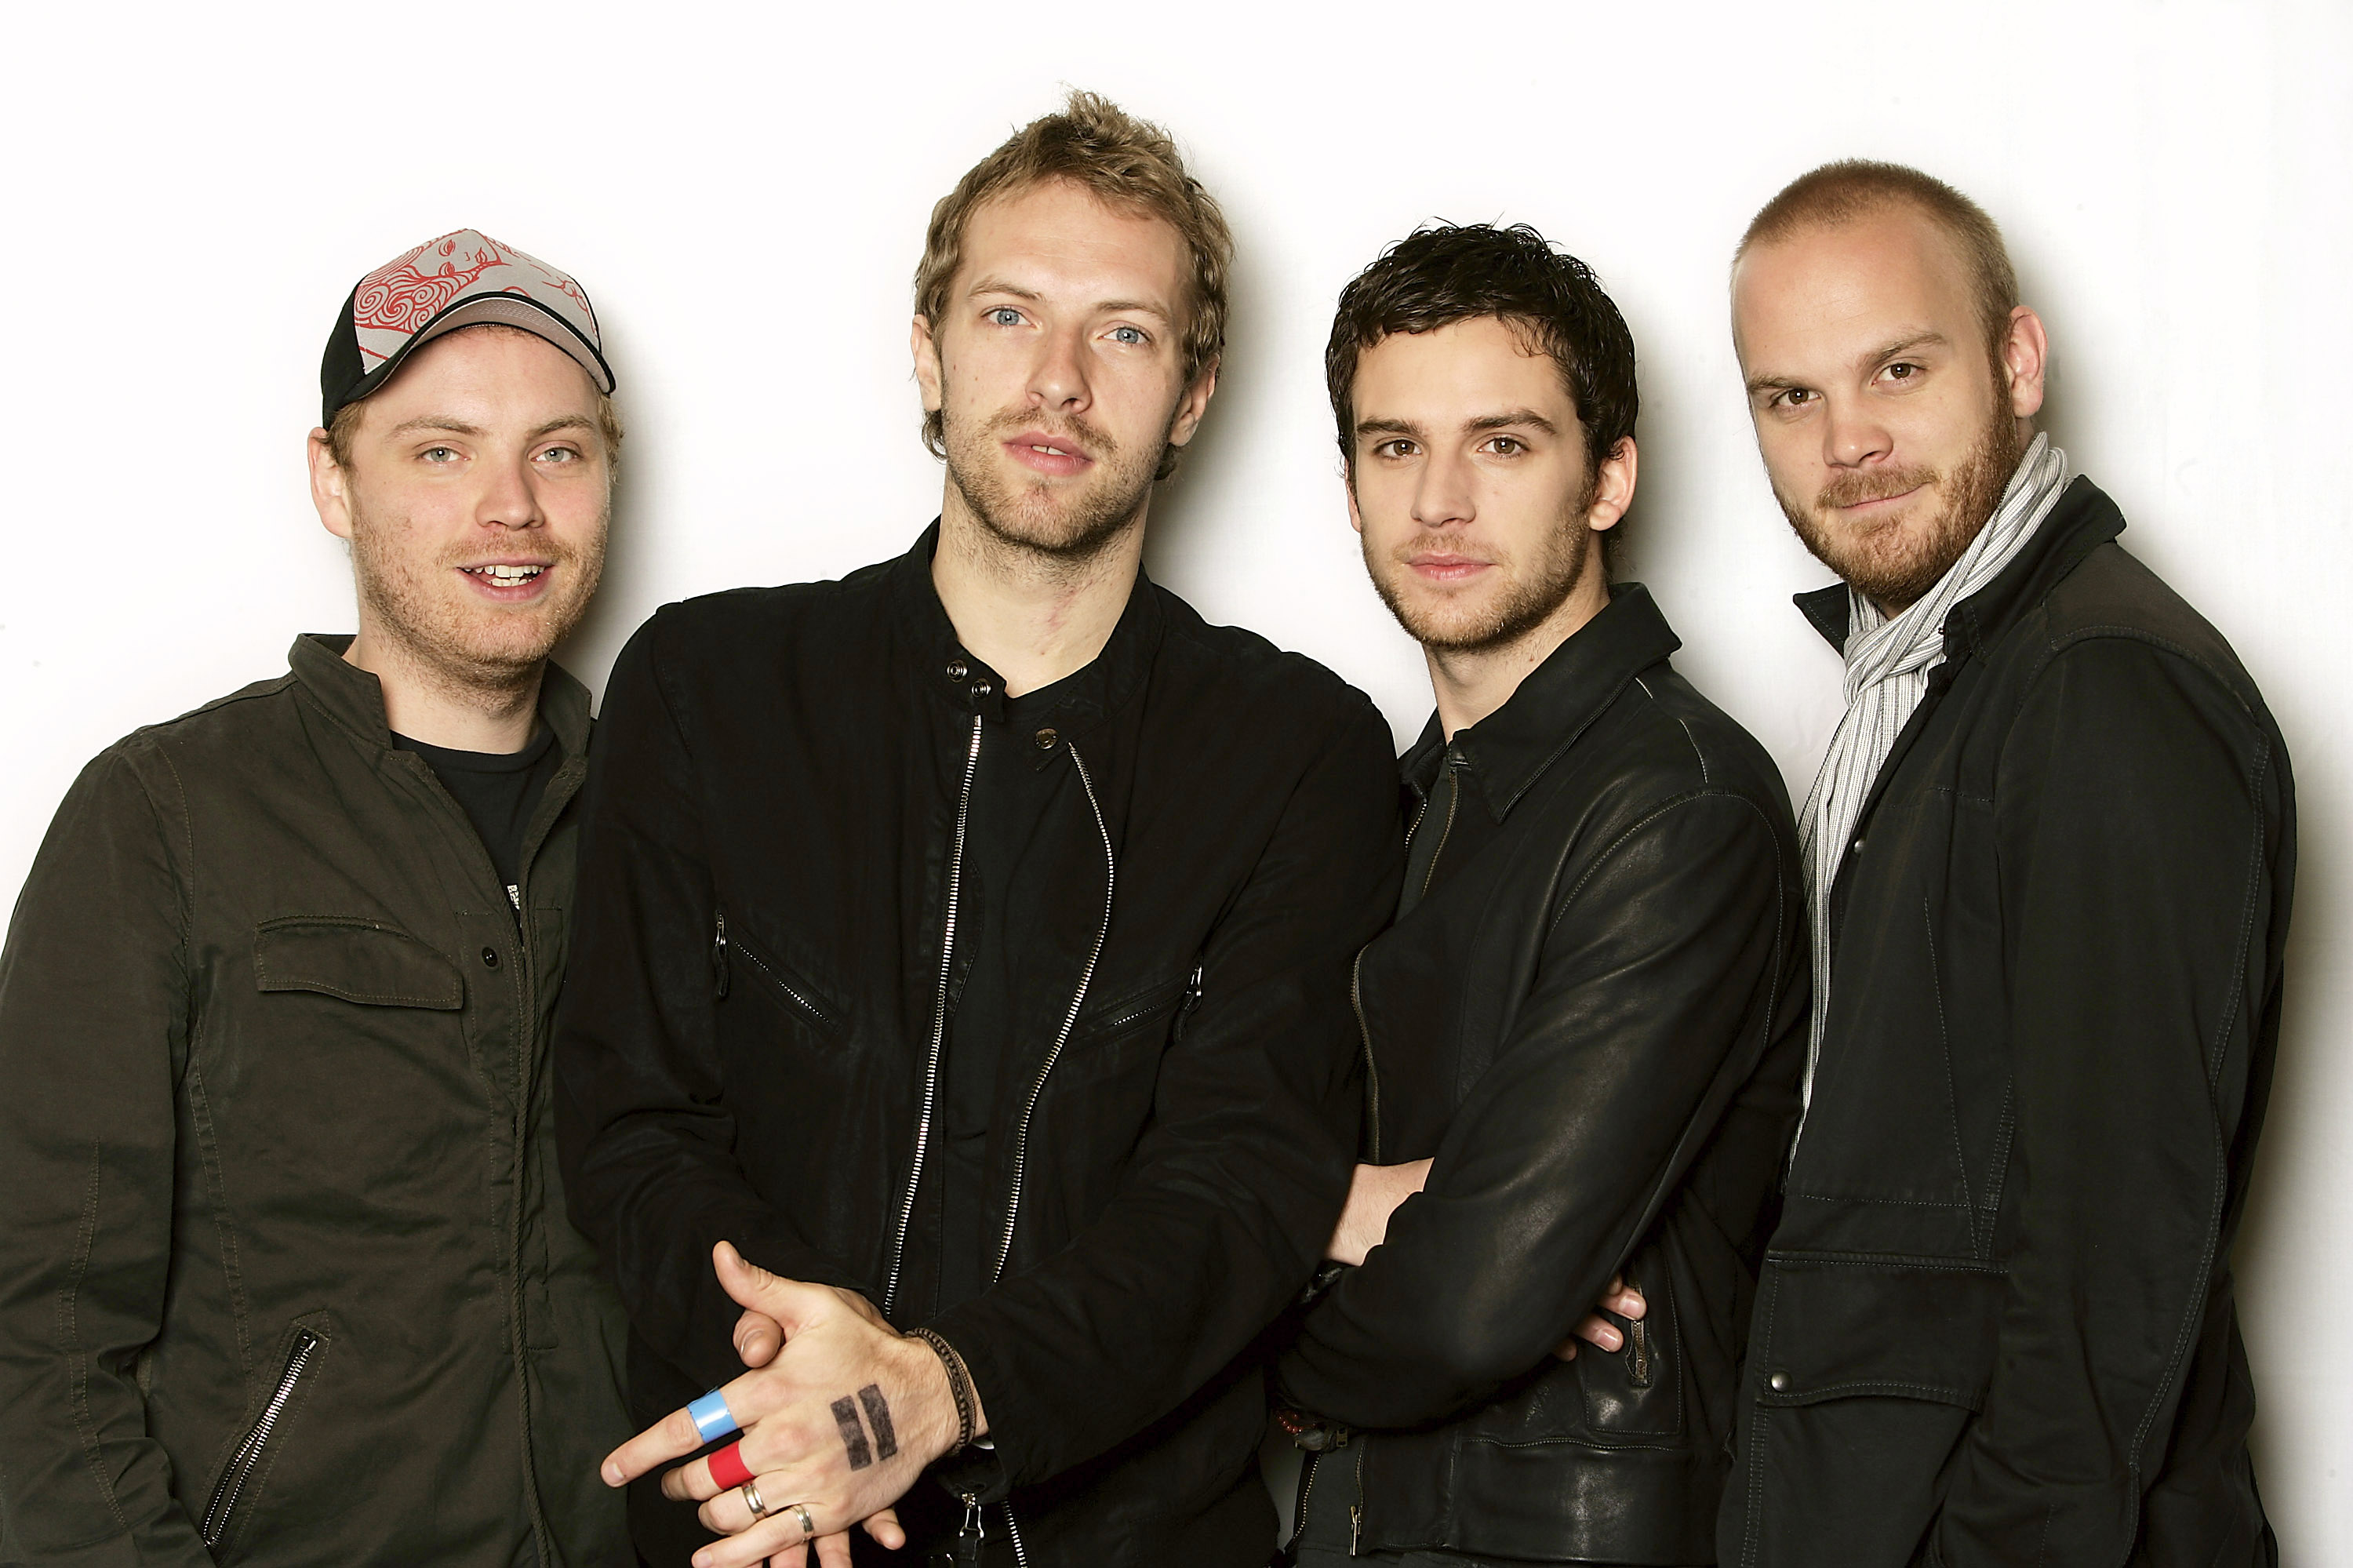 Group photo of the members of the British rock band Coldplay